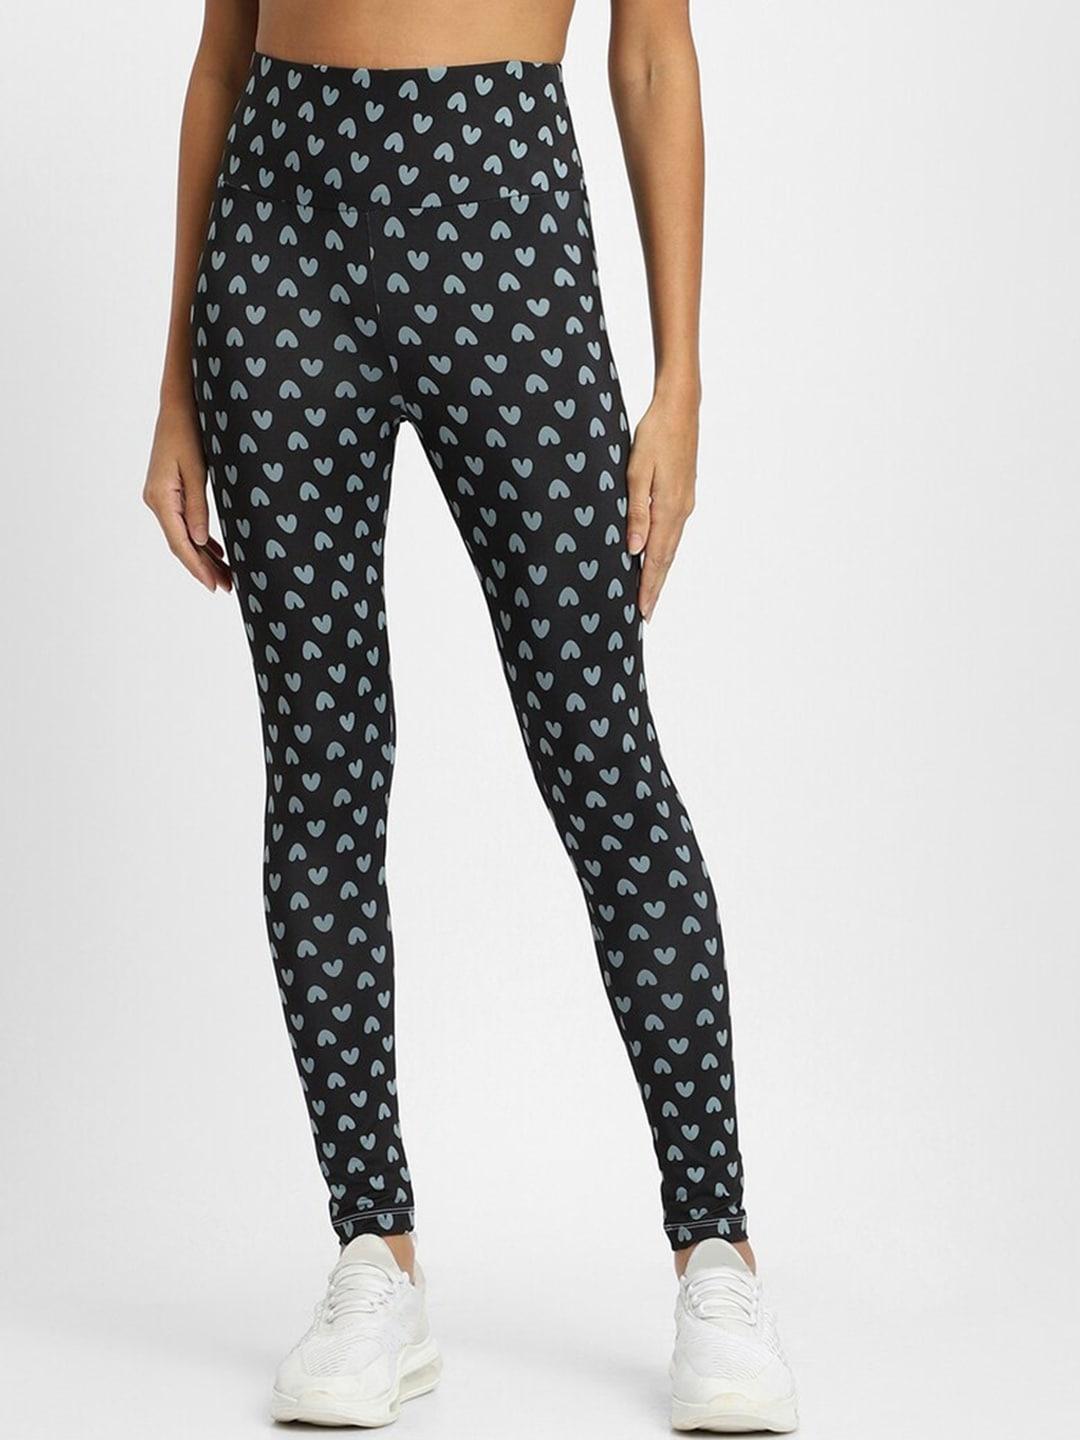 forever-21-women-printed-ankle-length-tights